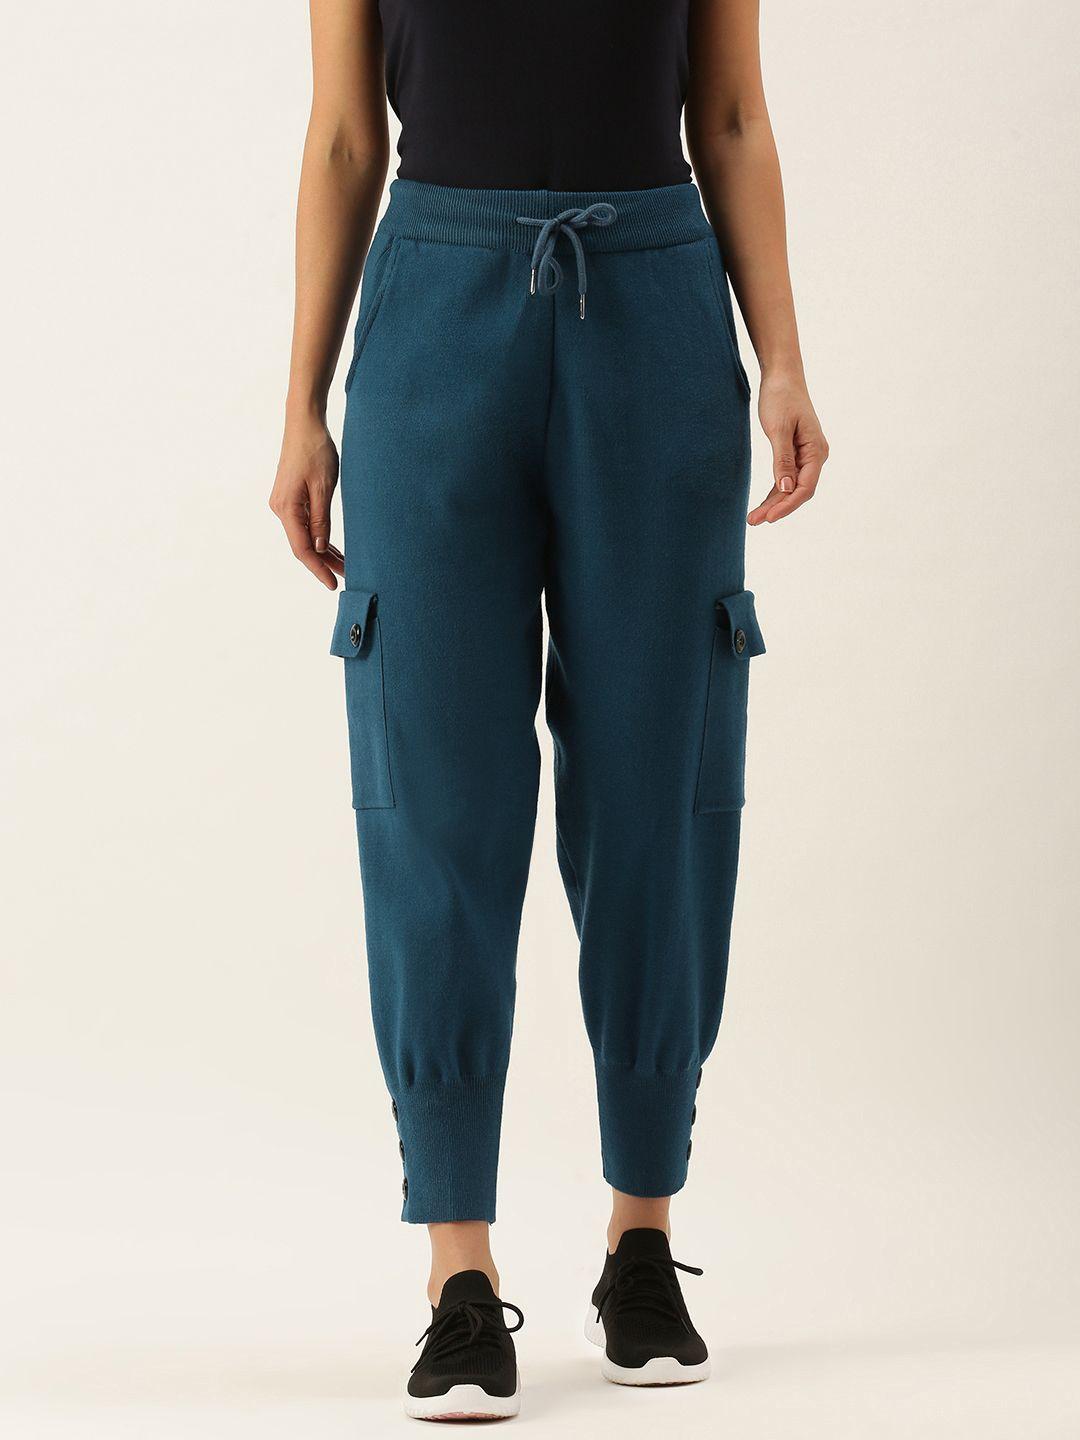 sheczzar women teal blue solid joggers with button detail